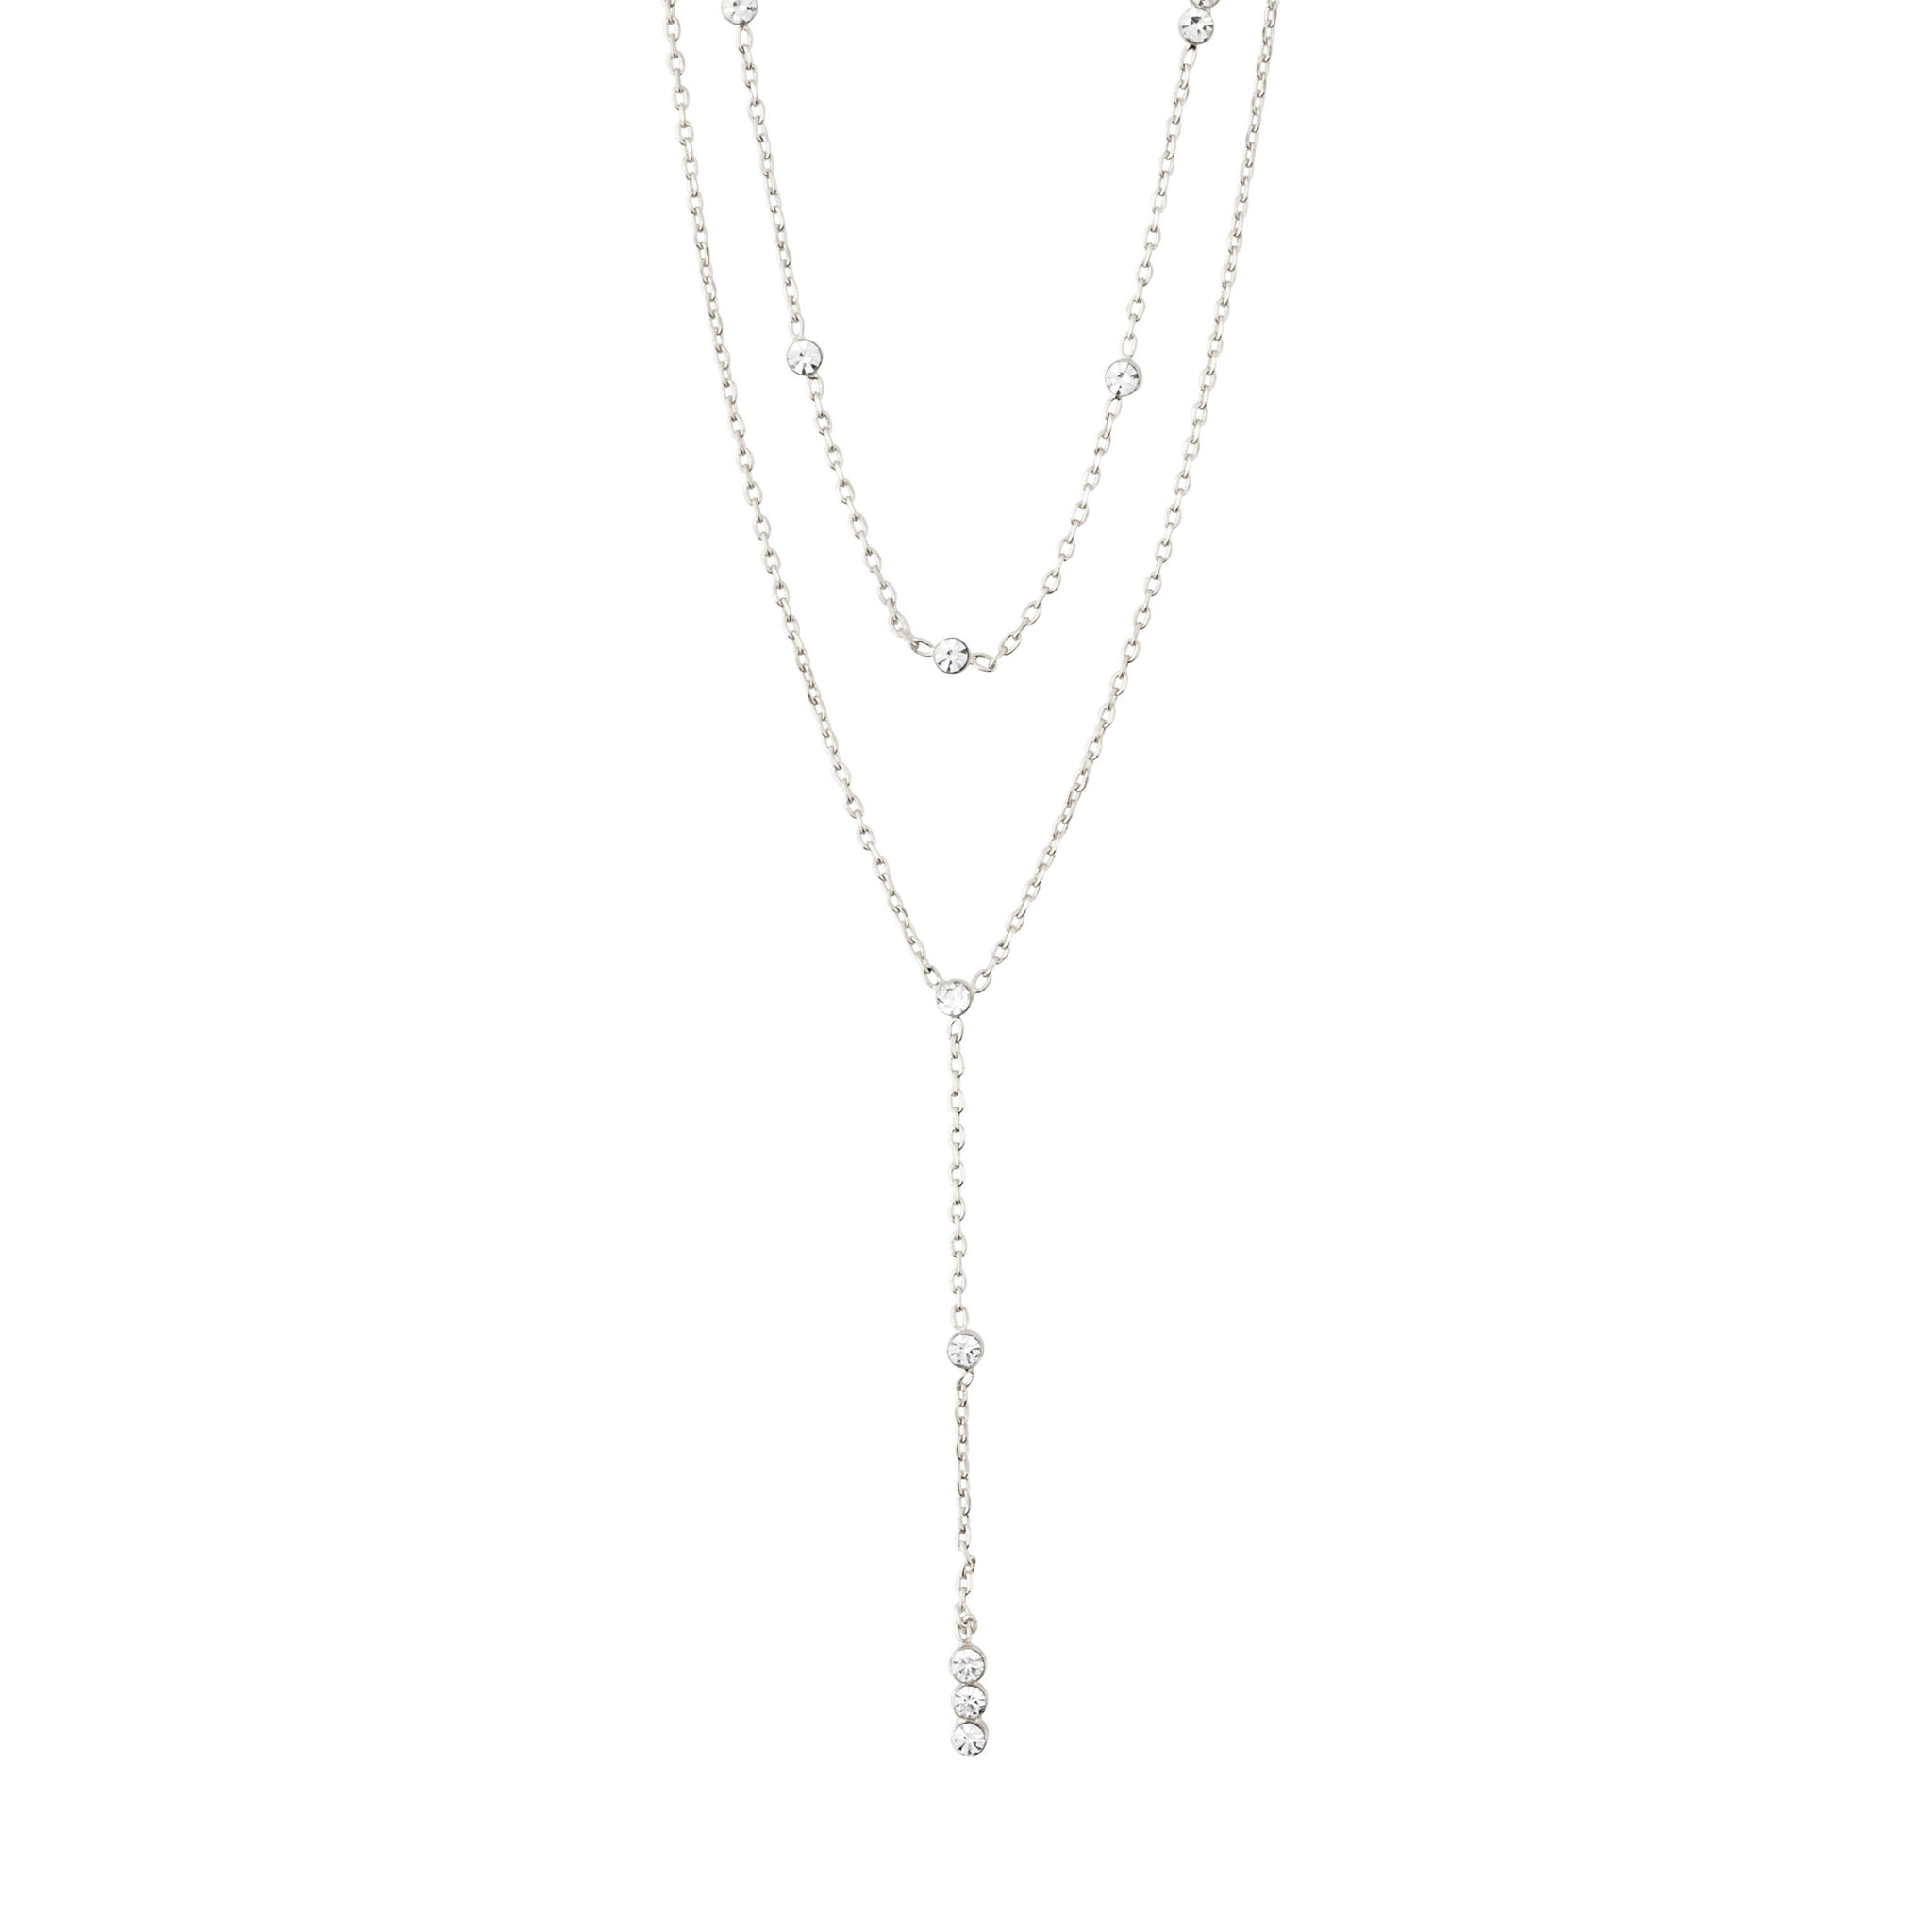 Kamari Necklace - Silver Plated